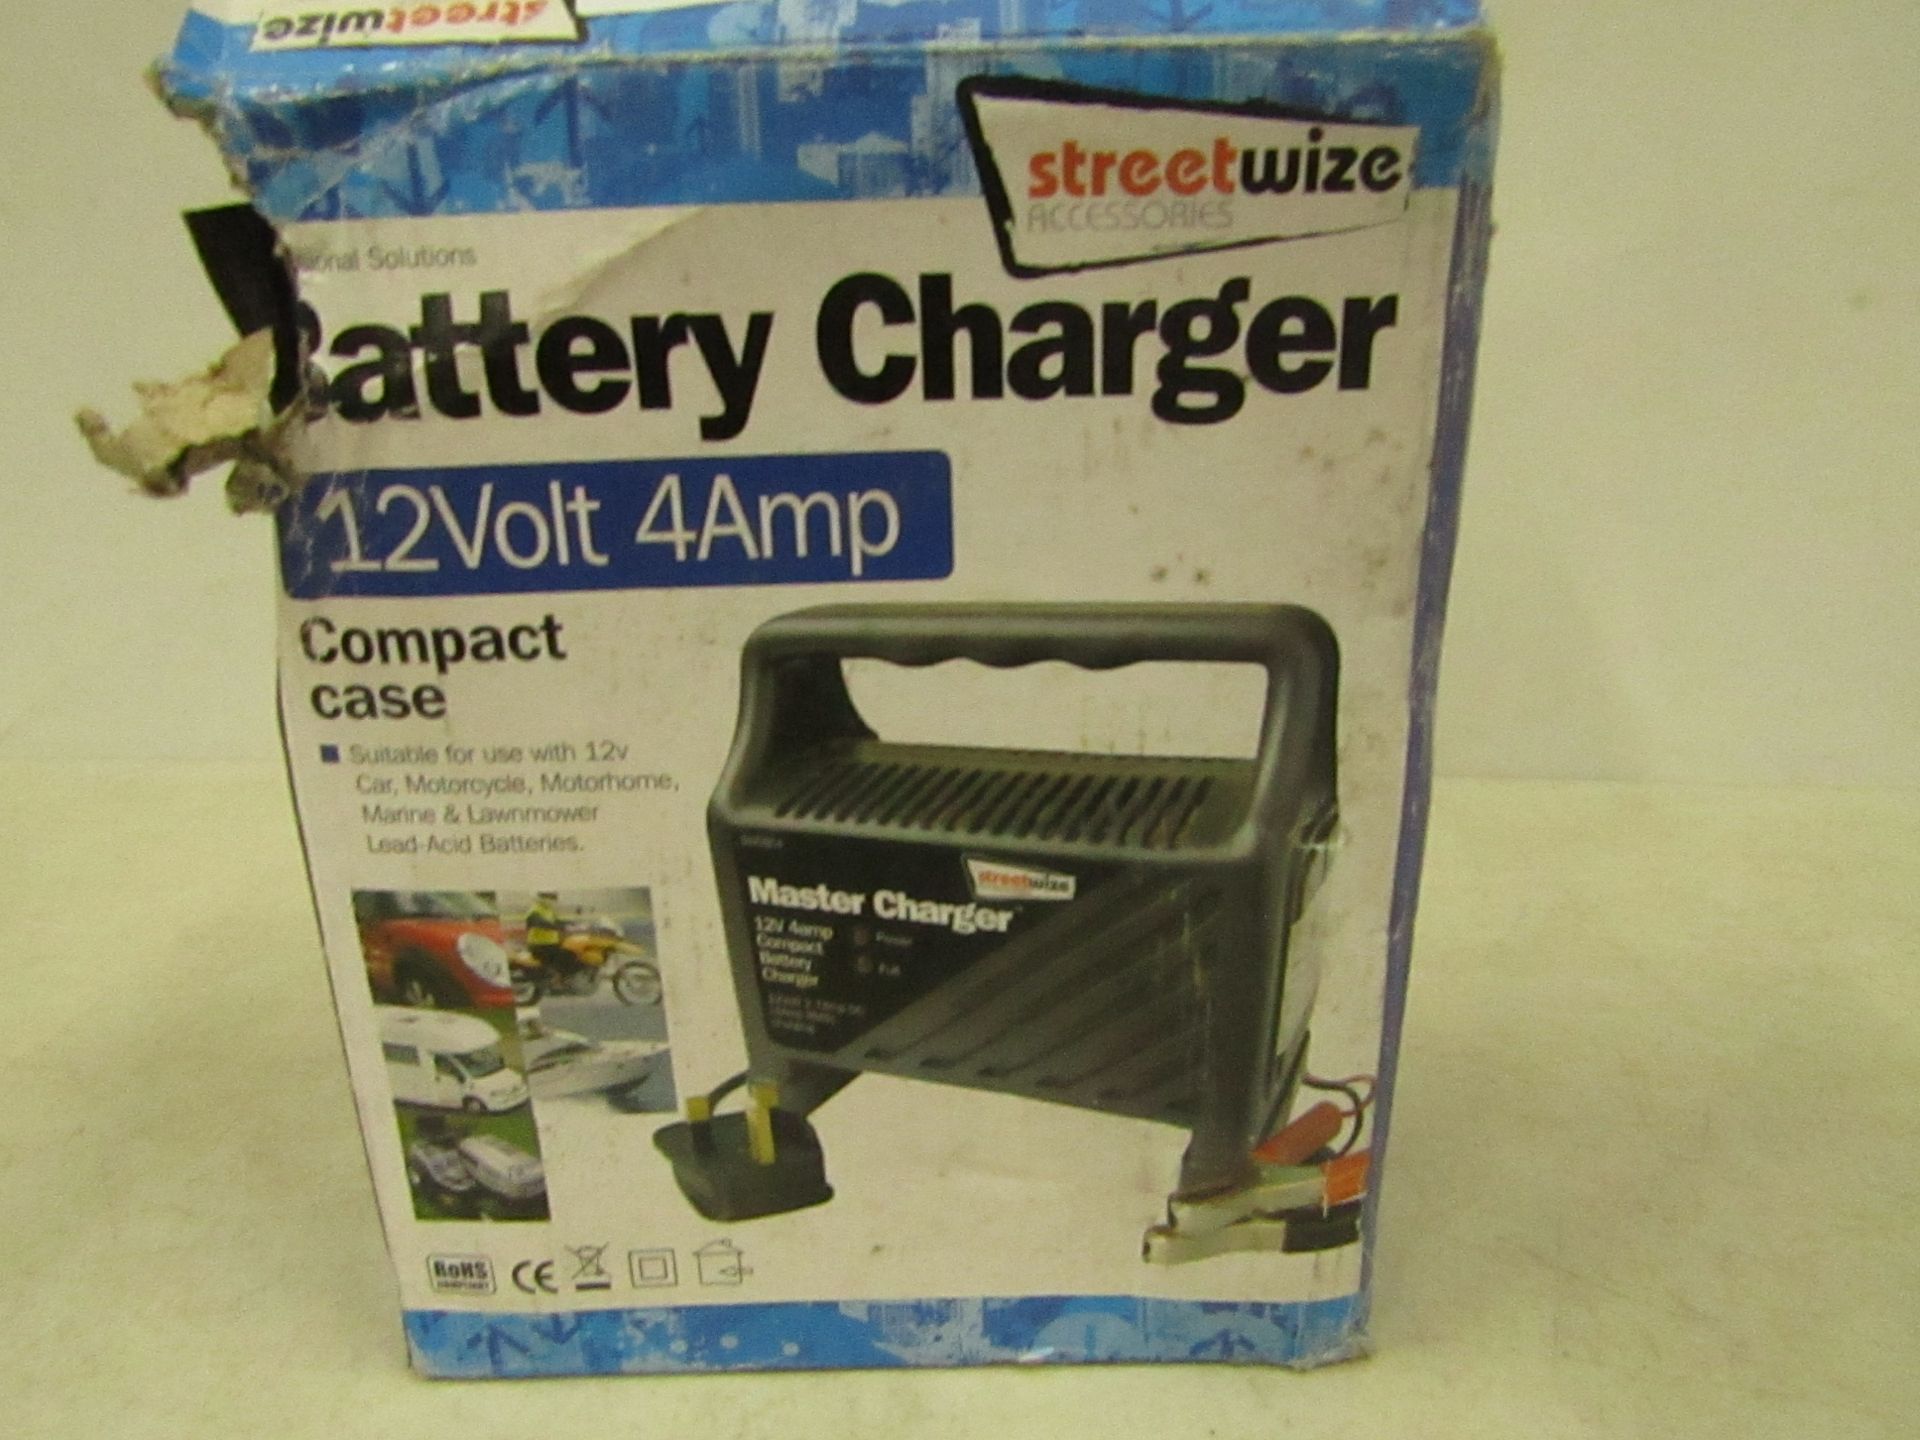 Streetwize 12Volt 4Amp battery charger, boxed and unchecked